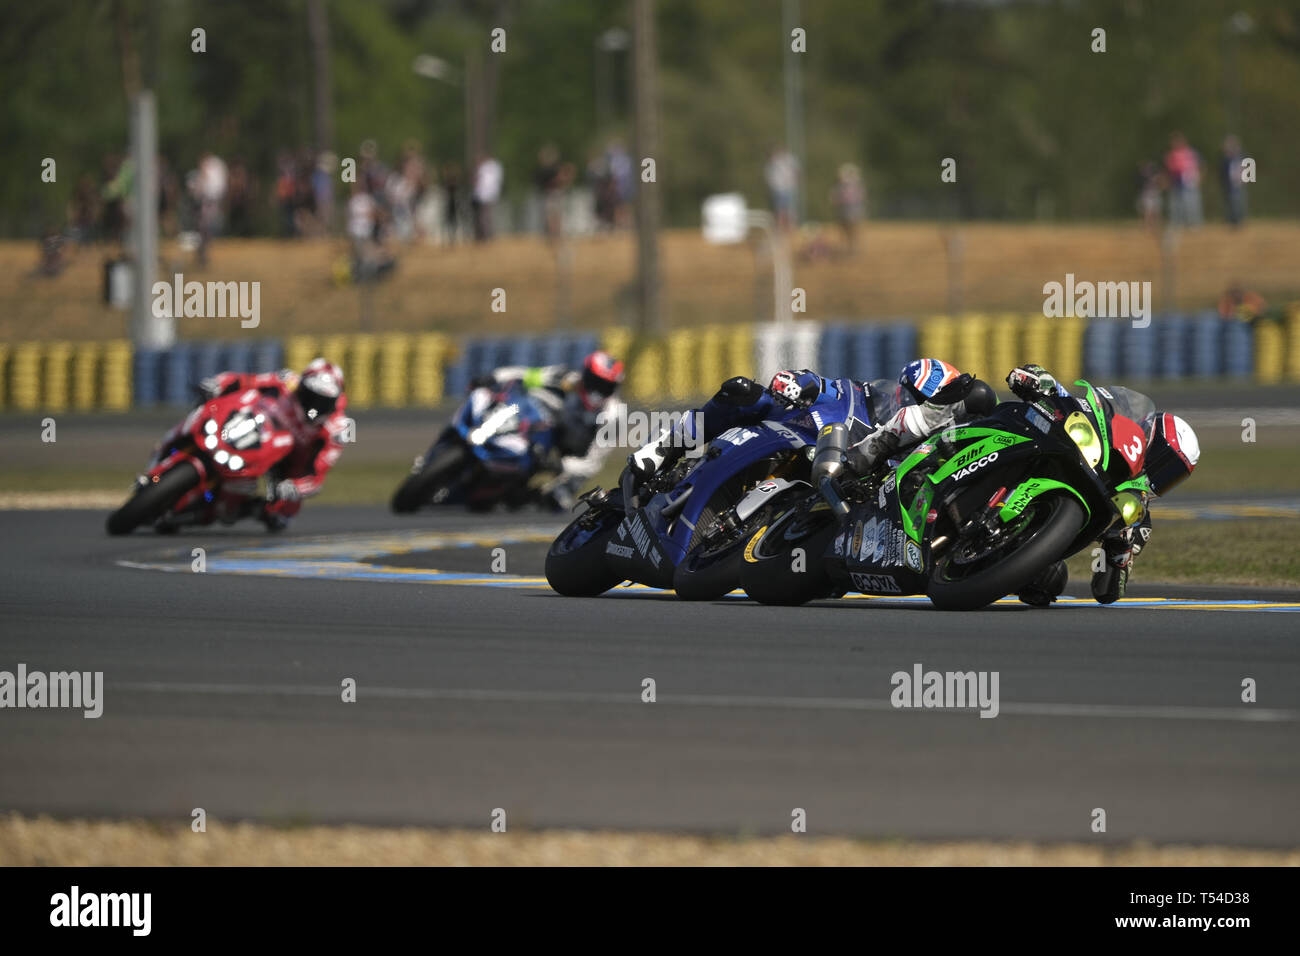 Le Mans, Sarthe, France. 20th Apr, 2019. AM Moto Racing Competition  Kawasaki ZX 10R - French rider JULIEN PILOT in action during the 42th  edition of the 24 hours motorcycle of Le